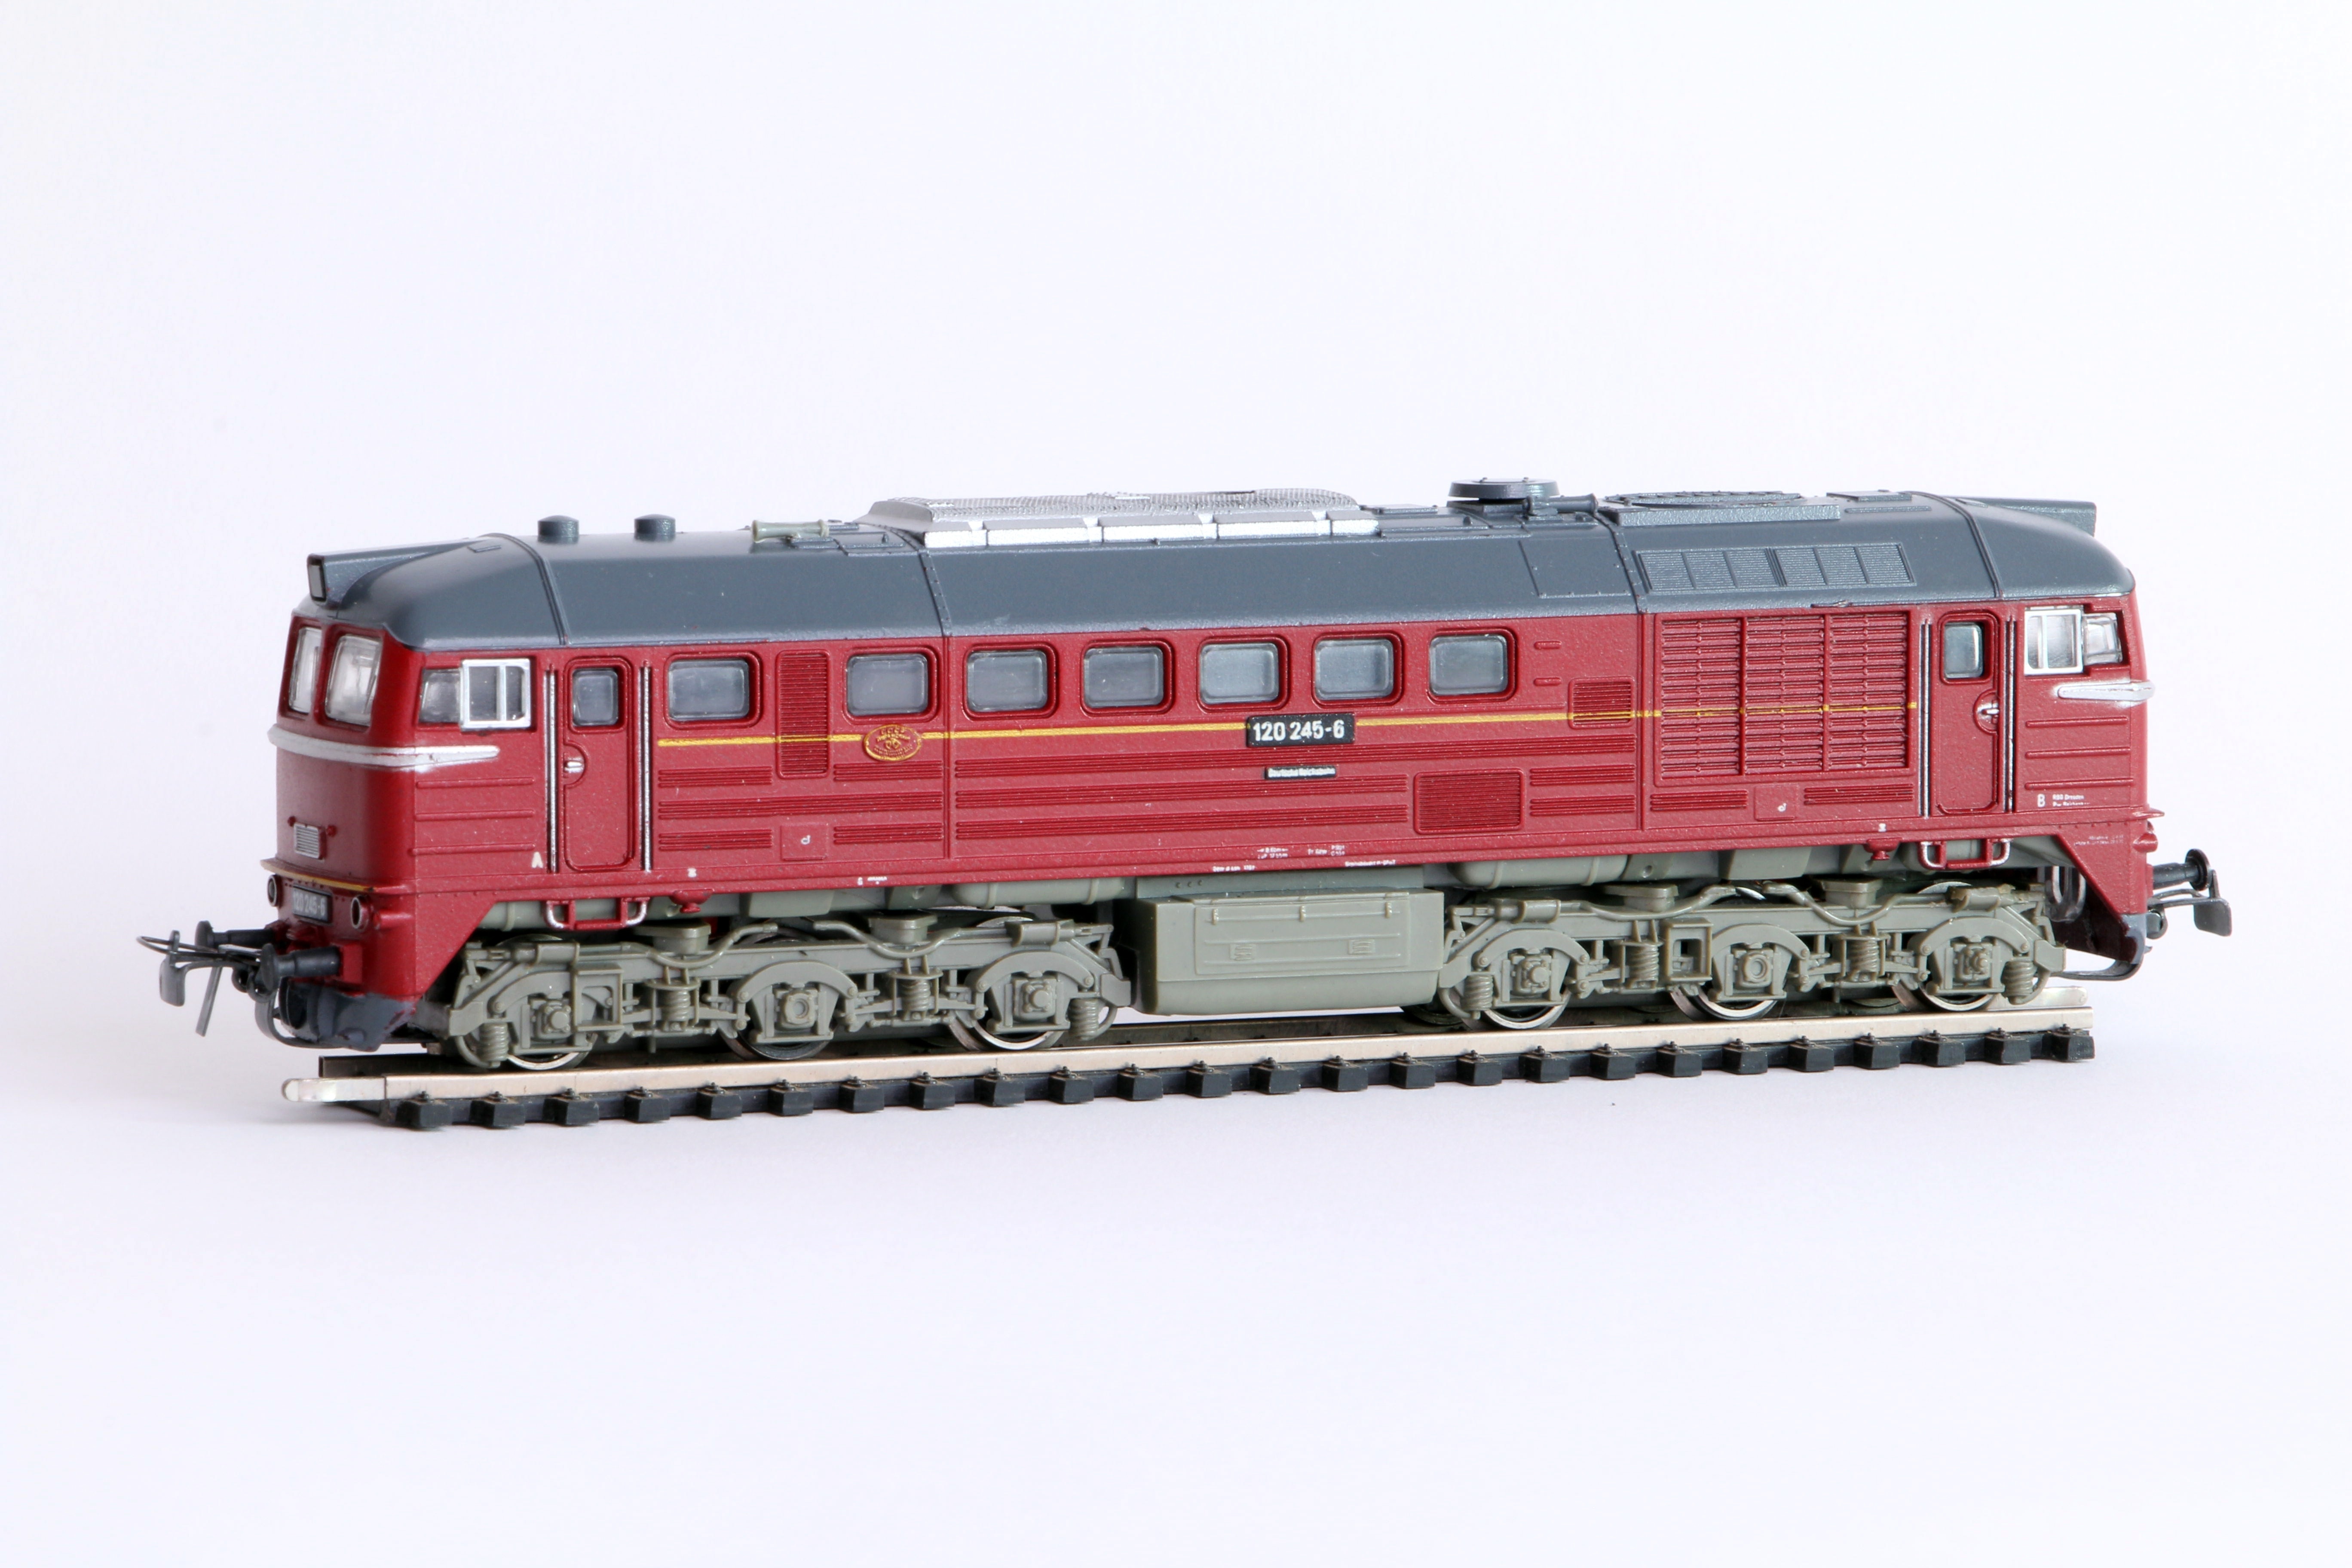 red and gray train toy